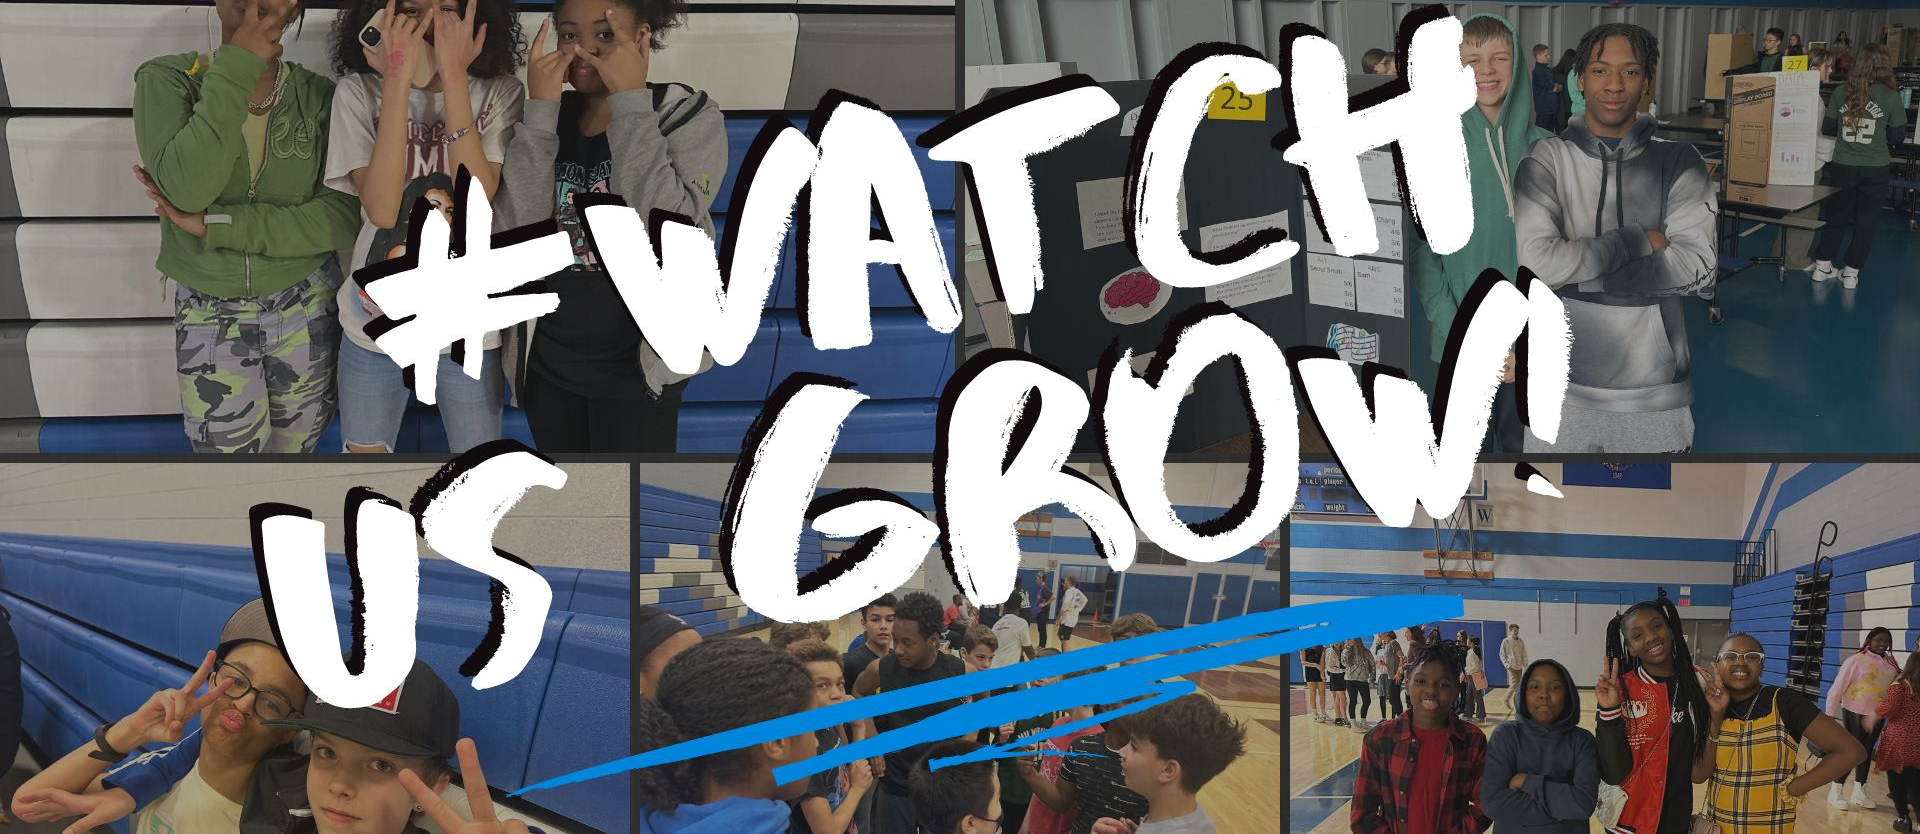 Watch Us Grow header with students